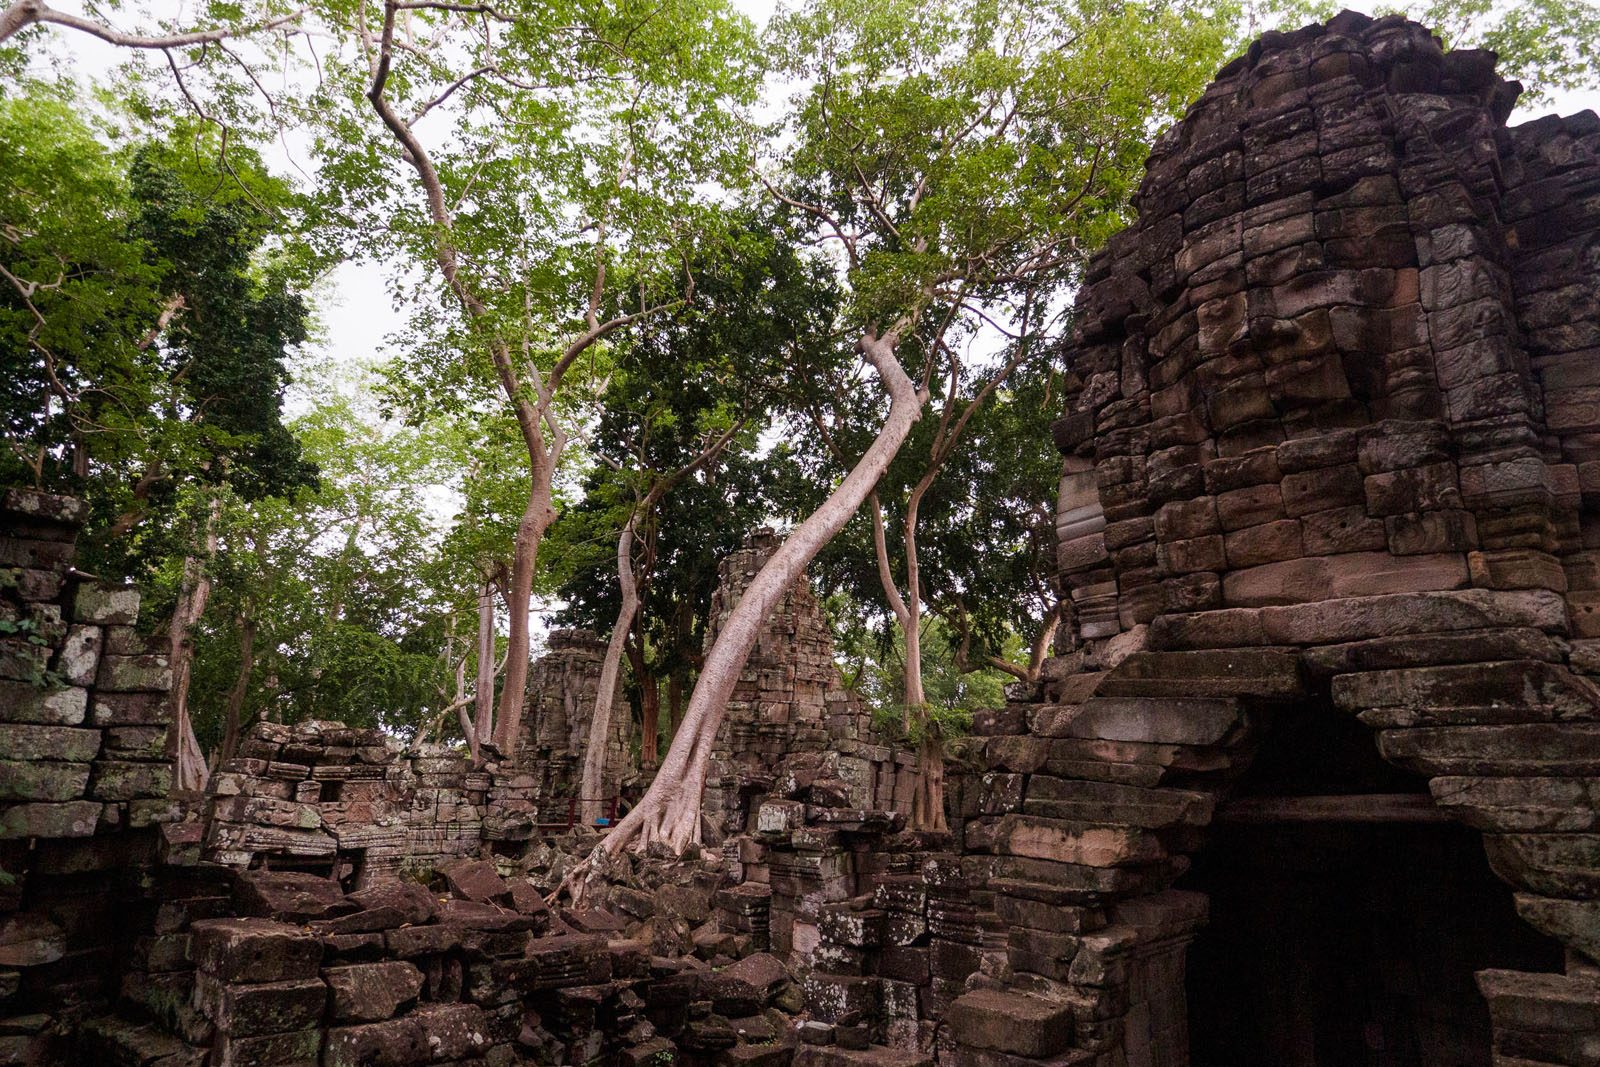 Nature takes over. Over the centuries, trees and vines have grown up around the Banteay Chhmar temple ruins. Photo by Emily Lush